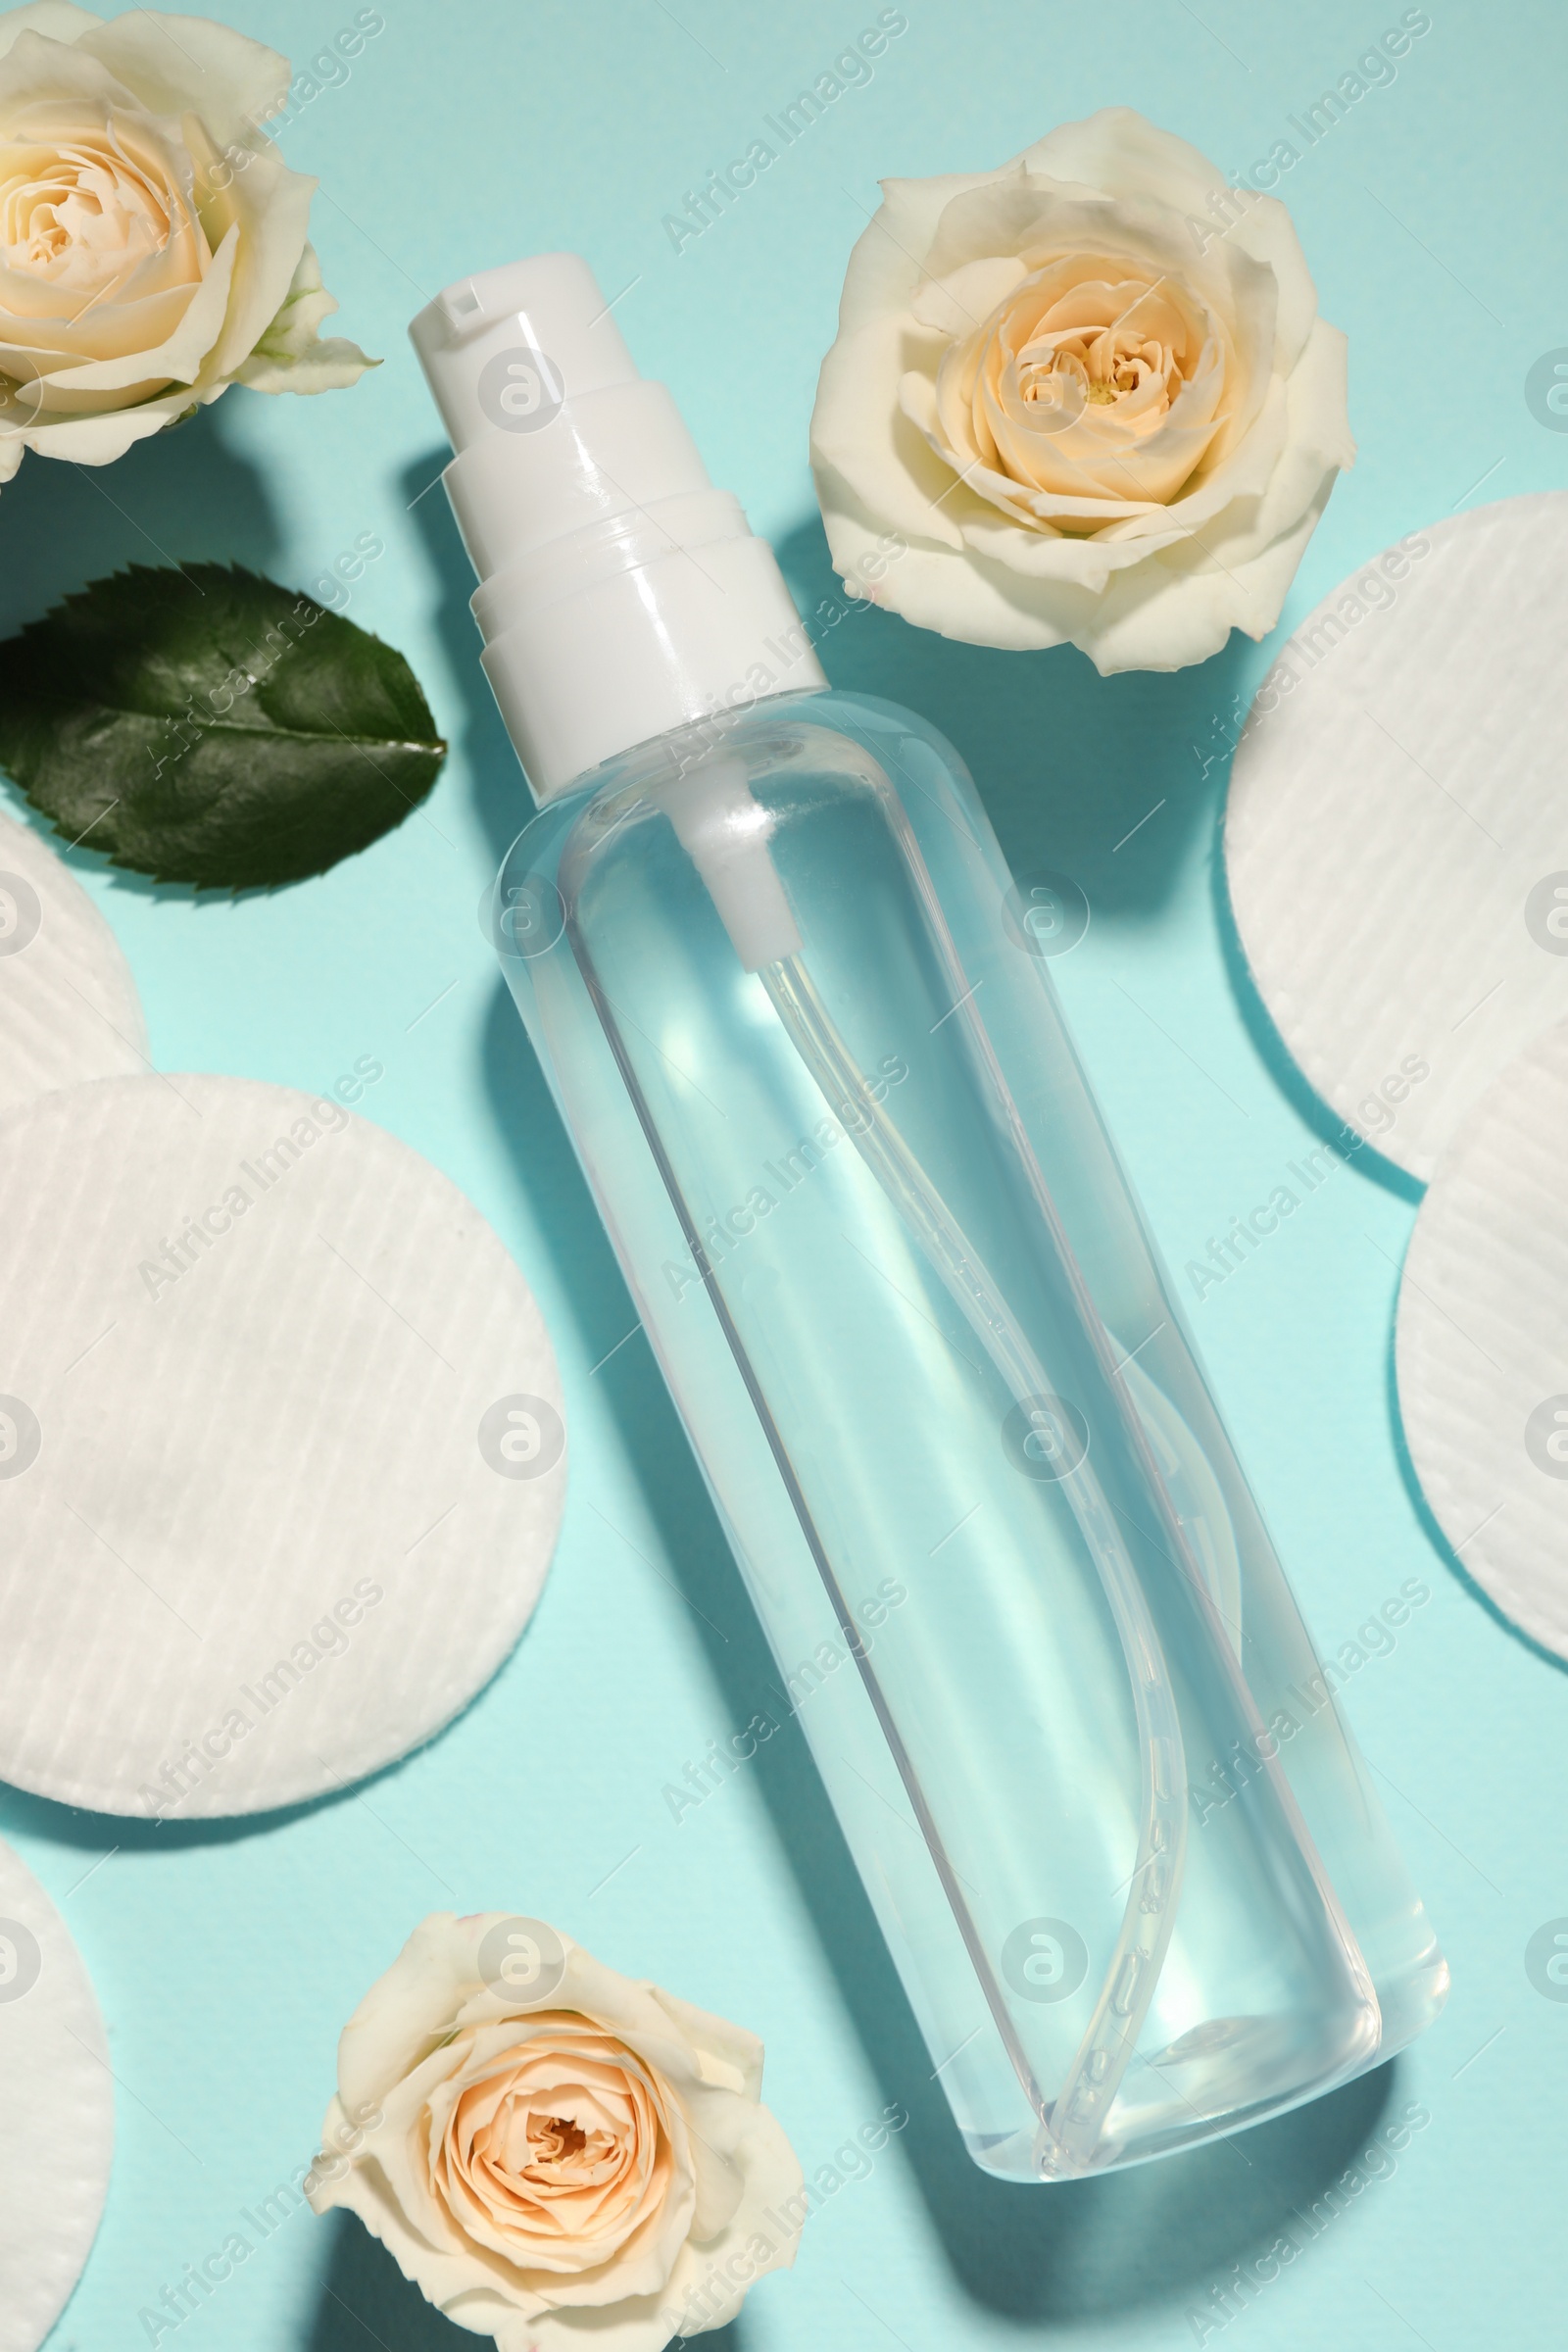 Photo of Bottle of micellar cleansing water, cotton pads and flowers on turquoise background, flat lay